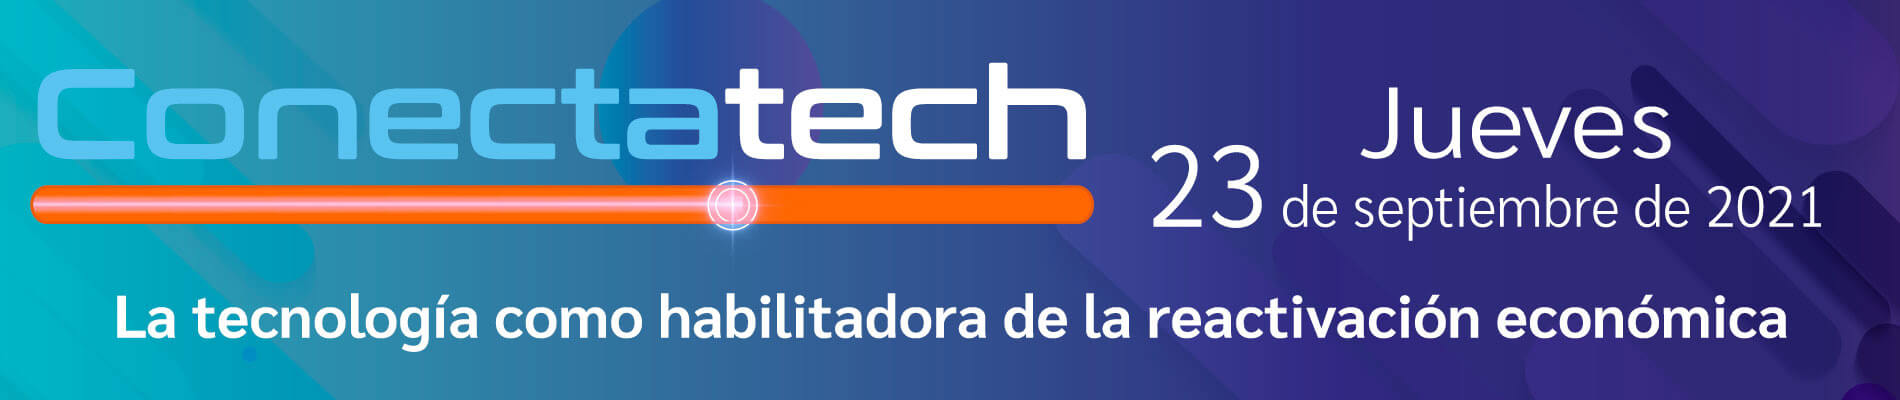 Banner Conectatech Thanks you page